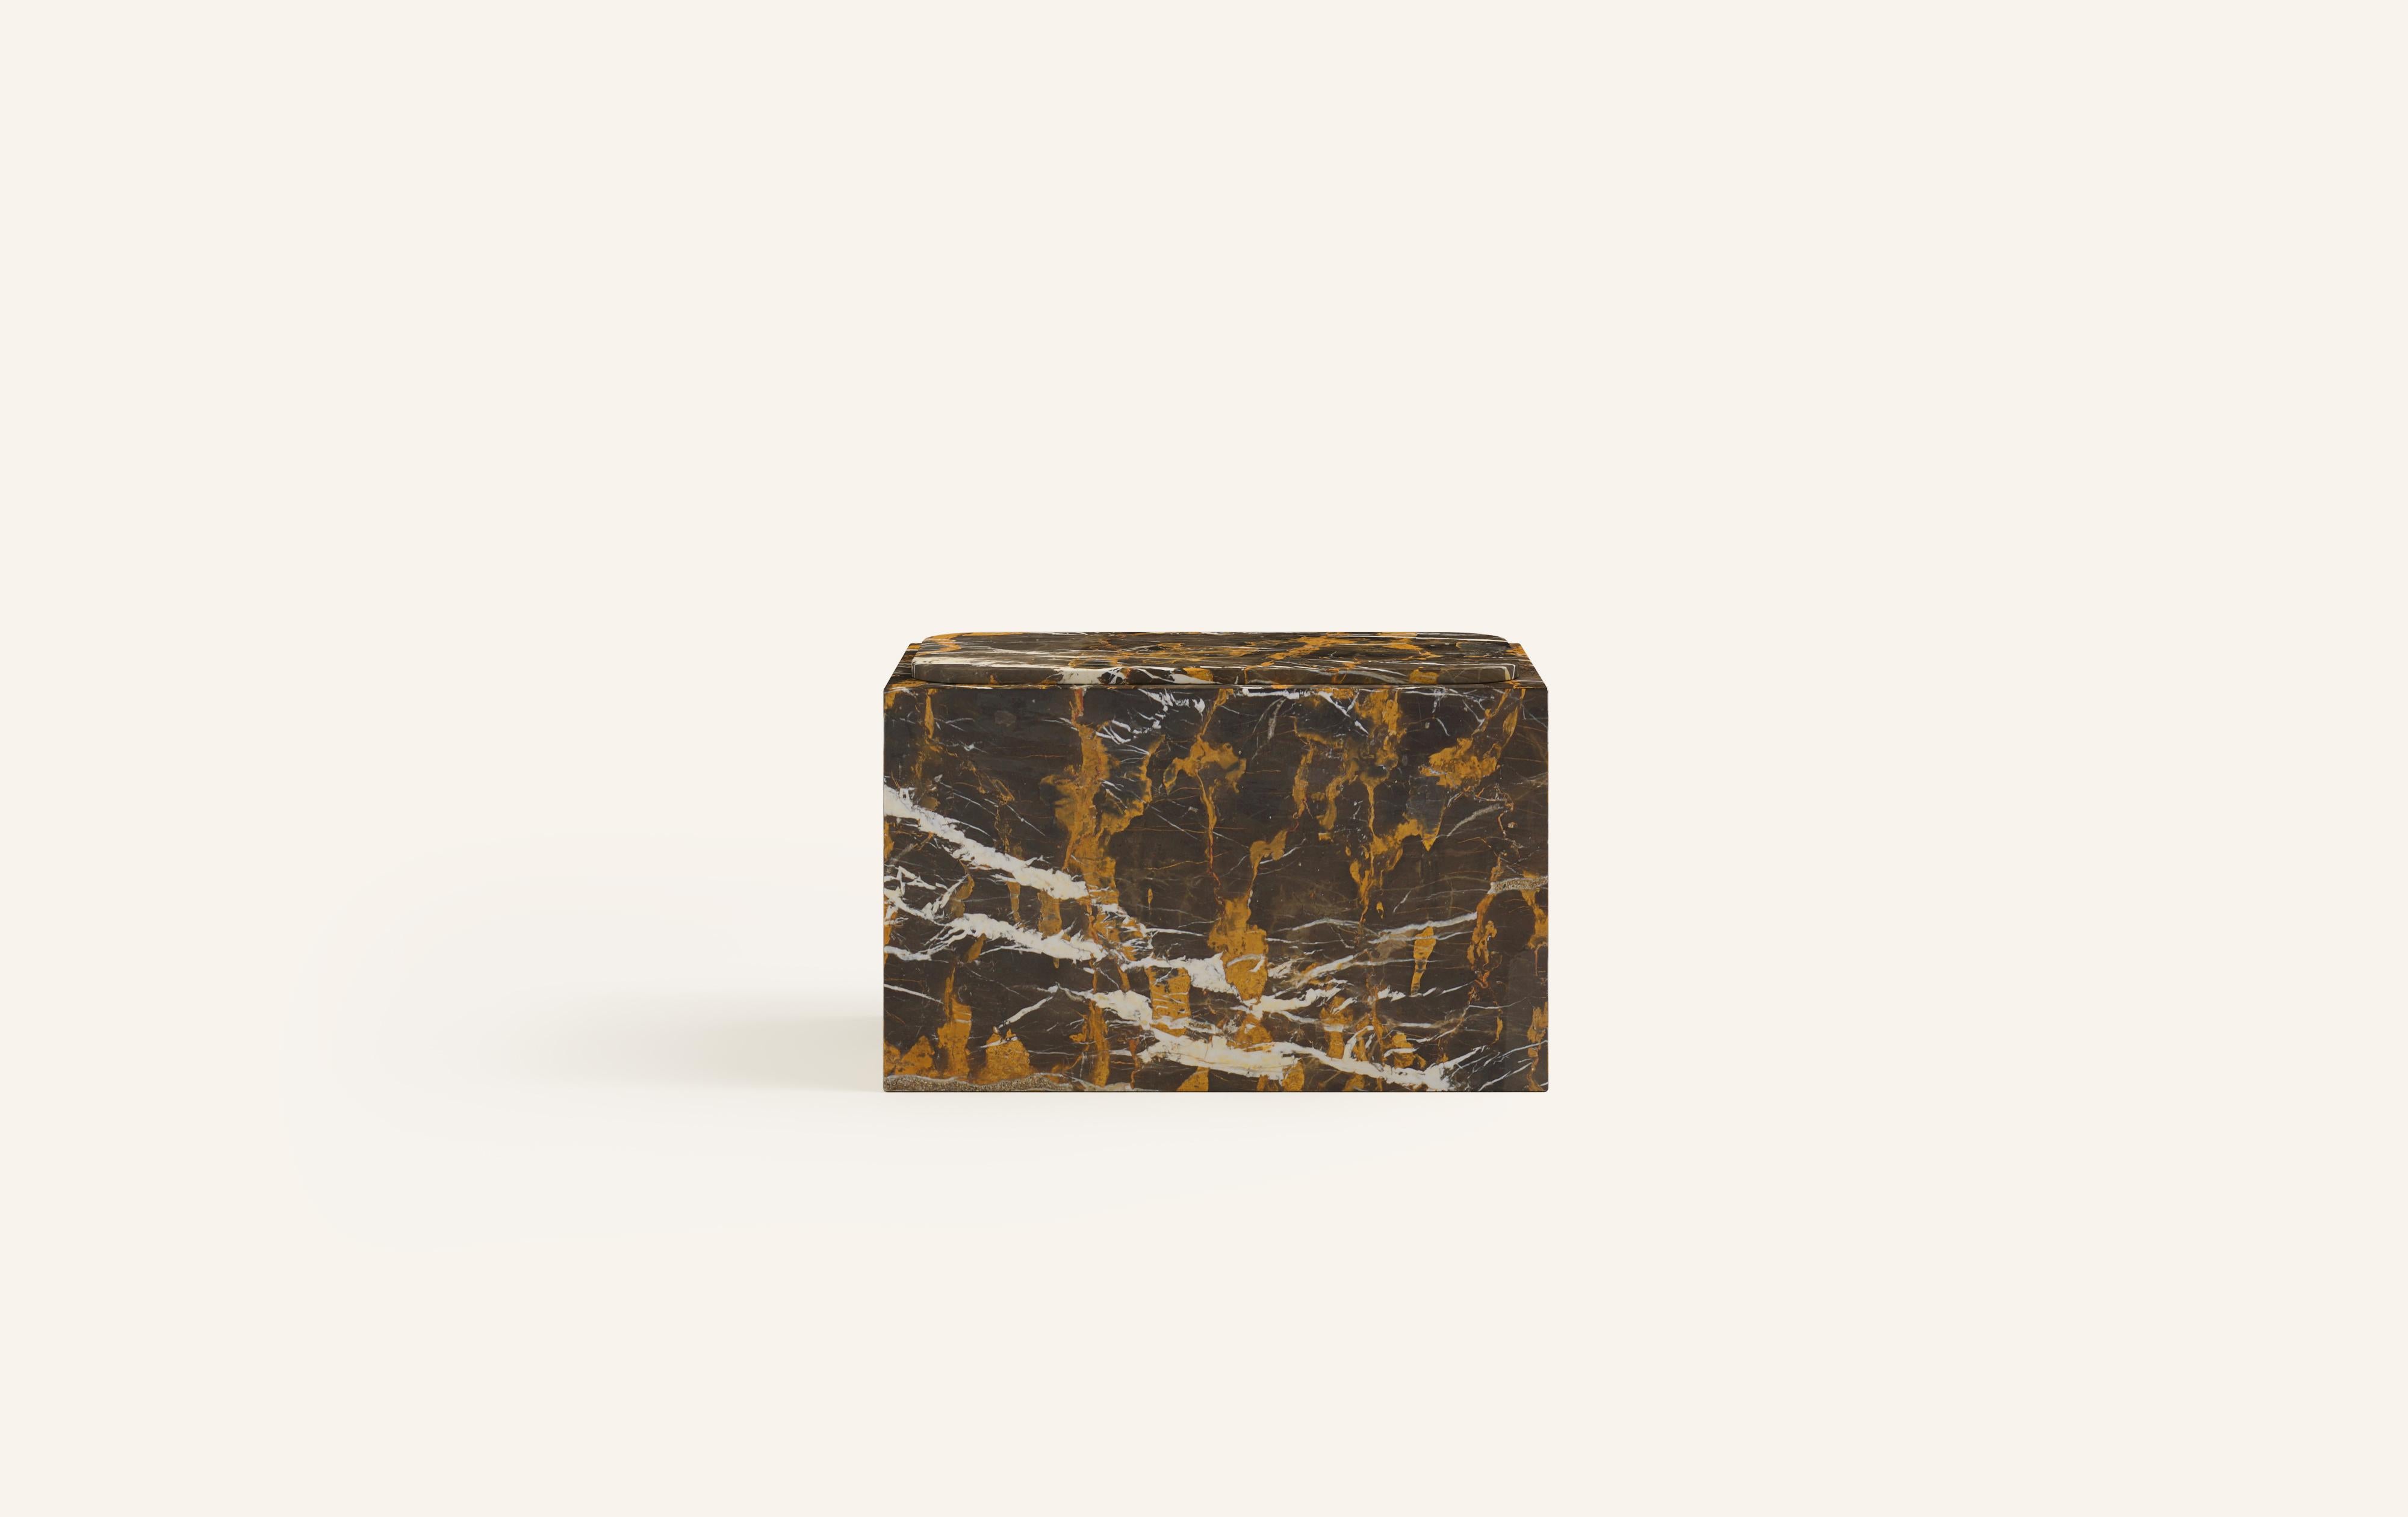 MONOLITHIC FORMS SOFTENED BY GENTLE EDGES. WITH ITS BOLD MARBLE PATTERNS CUBO IS AS VERSATILE AS IT IS STRIKING.

DIMENSIONS:
30”L x 16”W x 19”H:
- 3/4